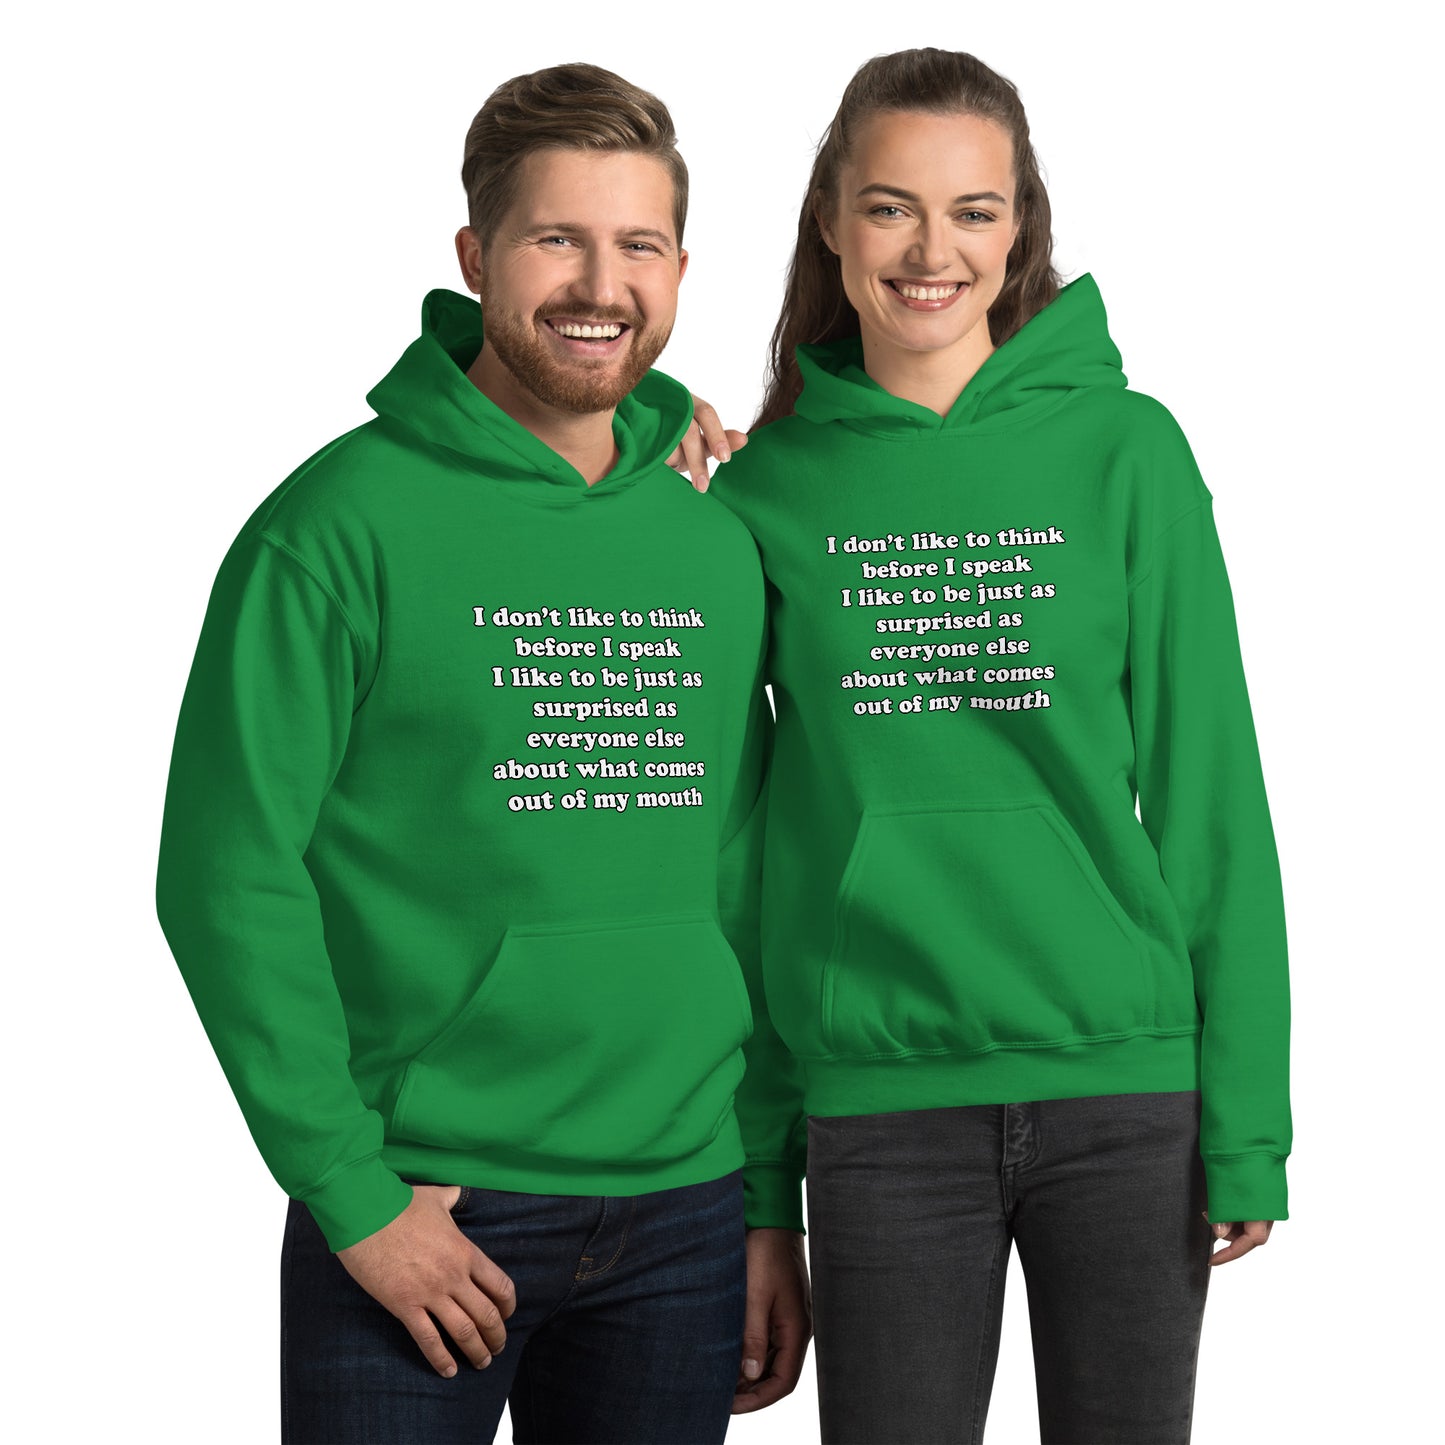 Man and woman with Irish green hoodie with text “I don't think before I speak Just as serprised as everyone about what comes out of my mouth"